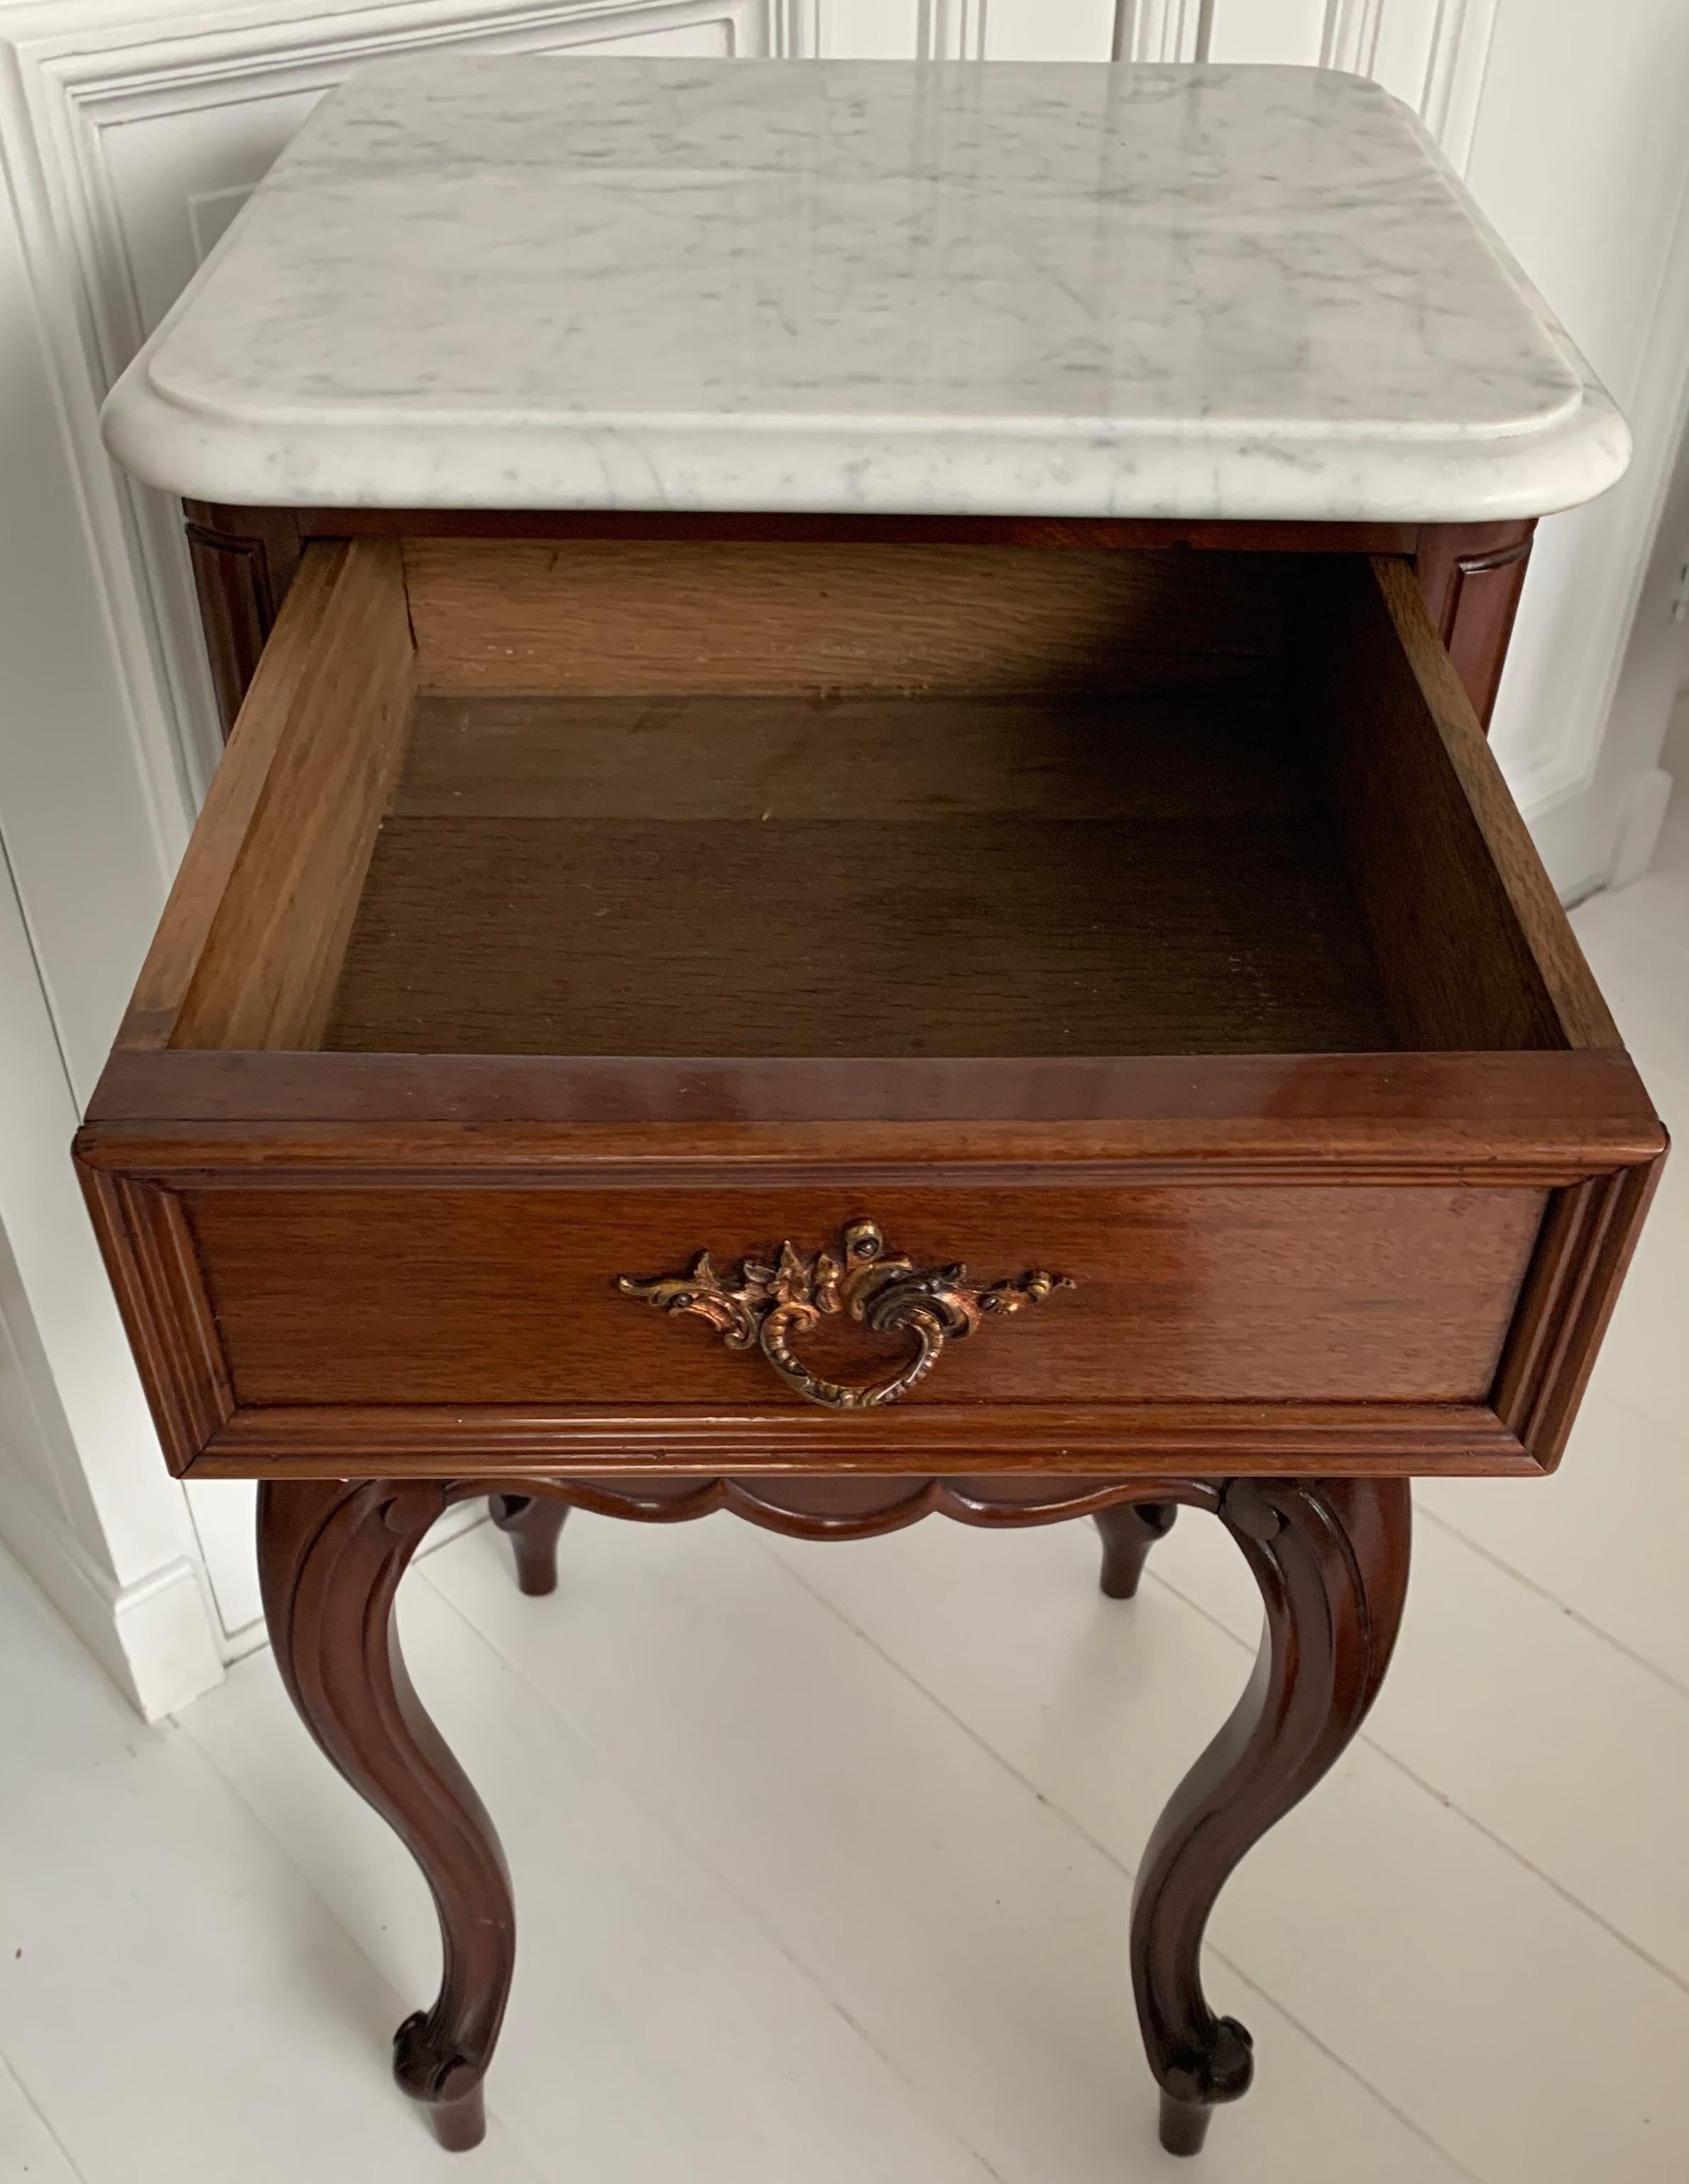 Wonderful Nutwood Bedside Cabinets / Night Stands w. Snow White Marble Tops In Good Condition For Sale In Lisse, NL